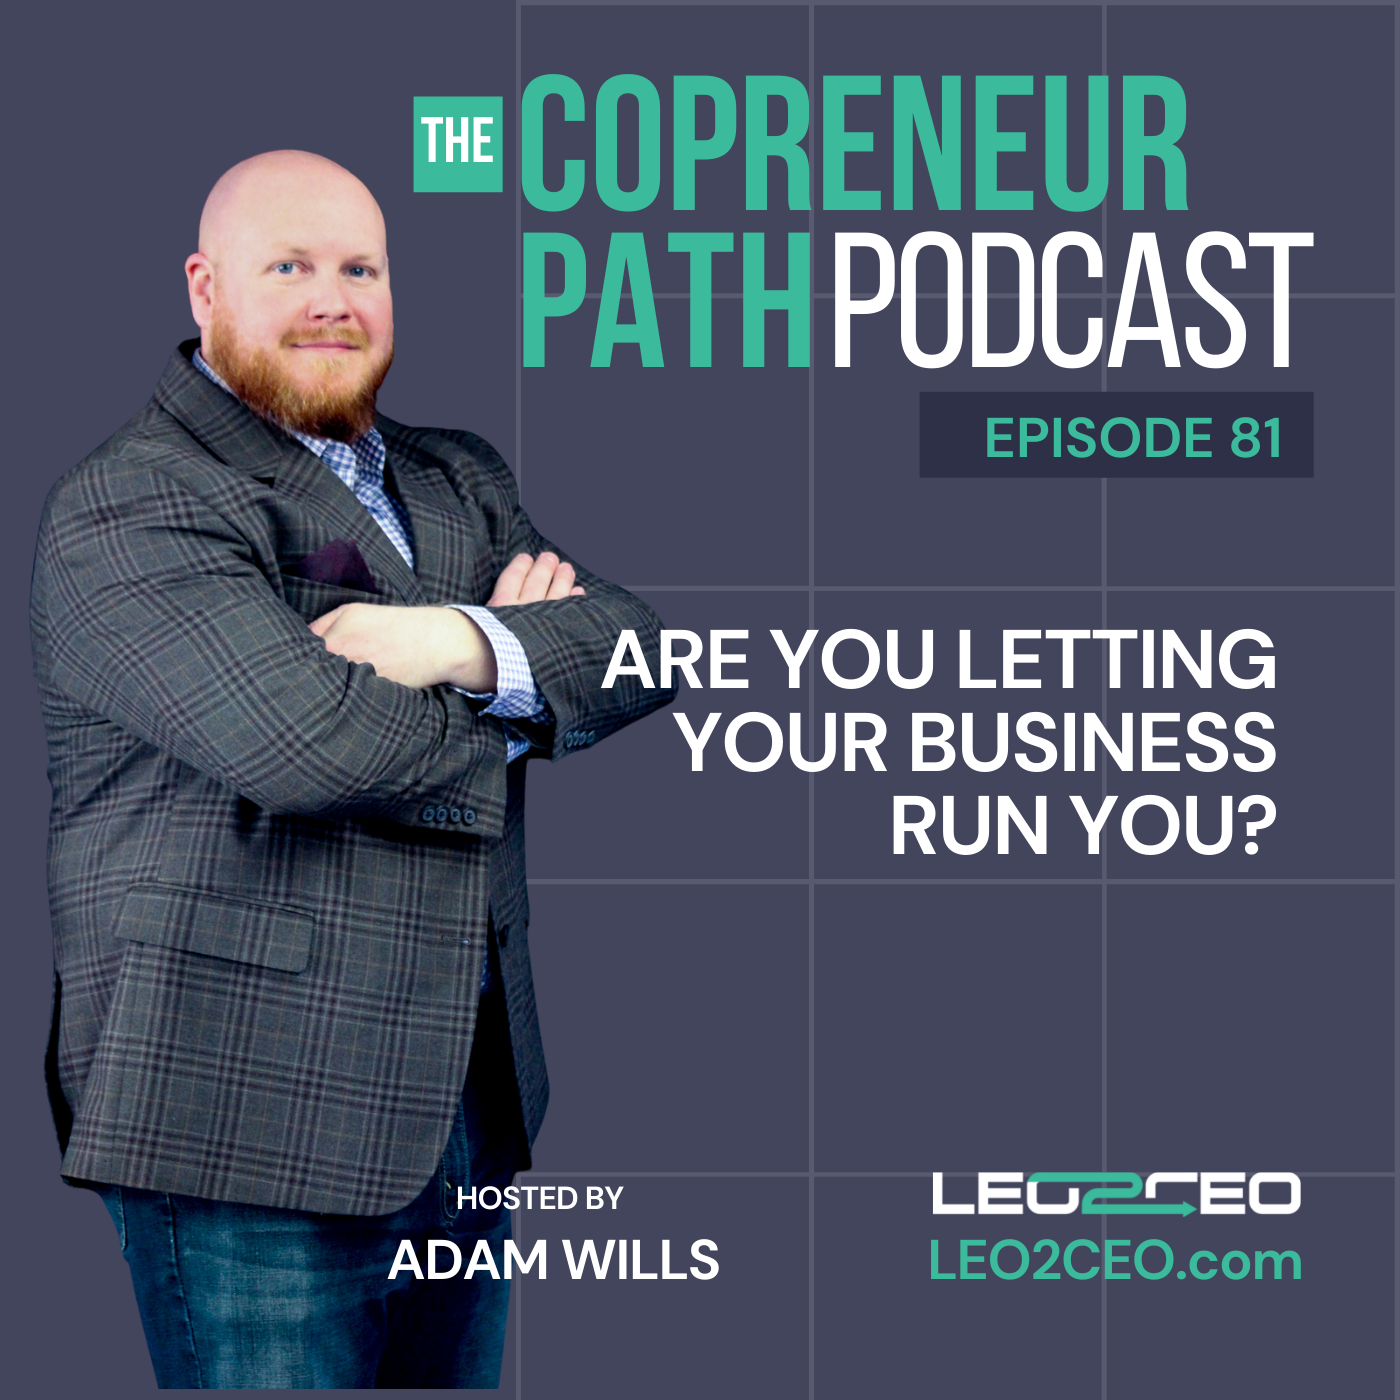 Are You Letting Your Business Run You?